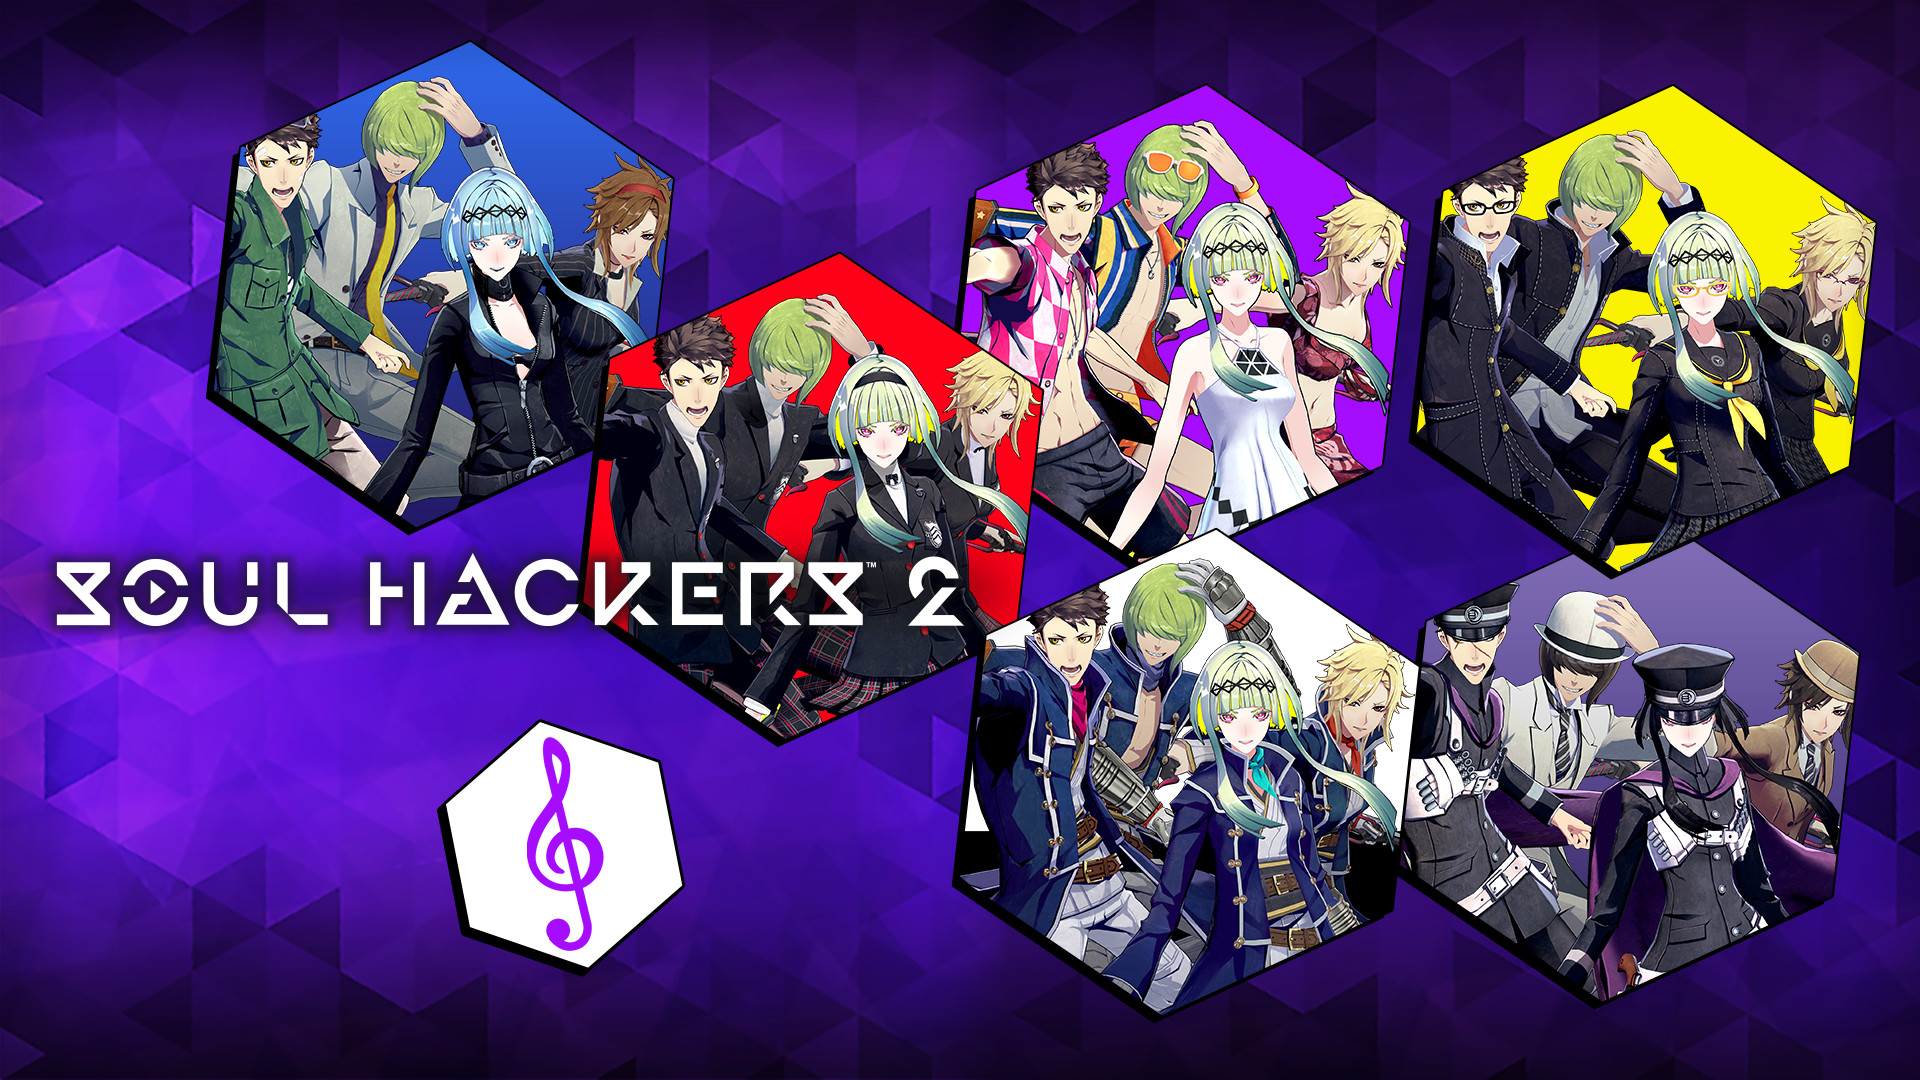 Persona publisher's 'Soul Hackers 2' JRPG announced for Xbox, PC